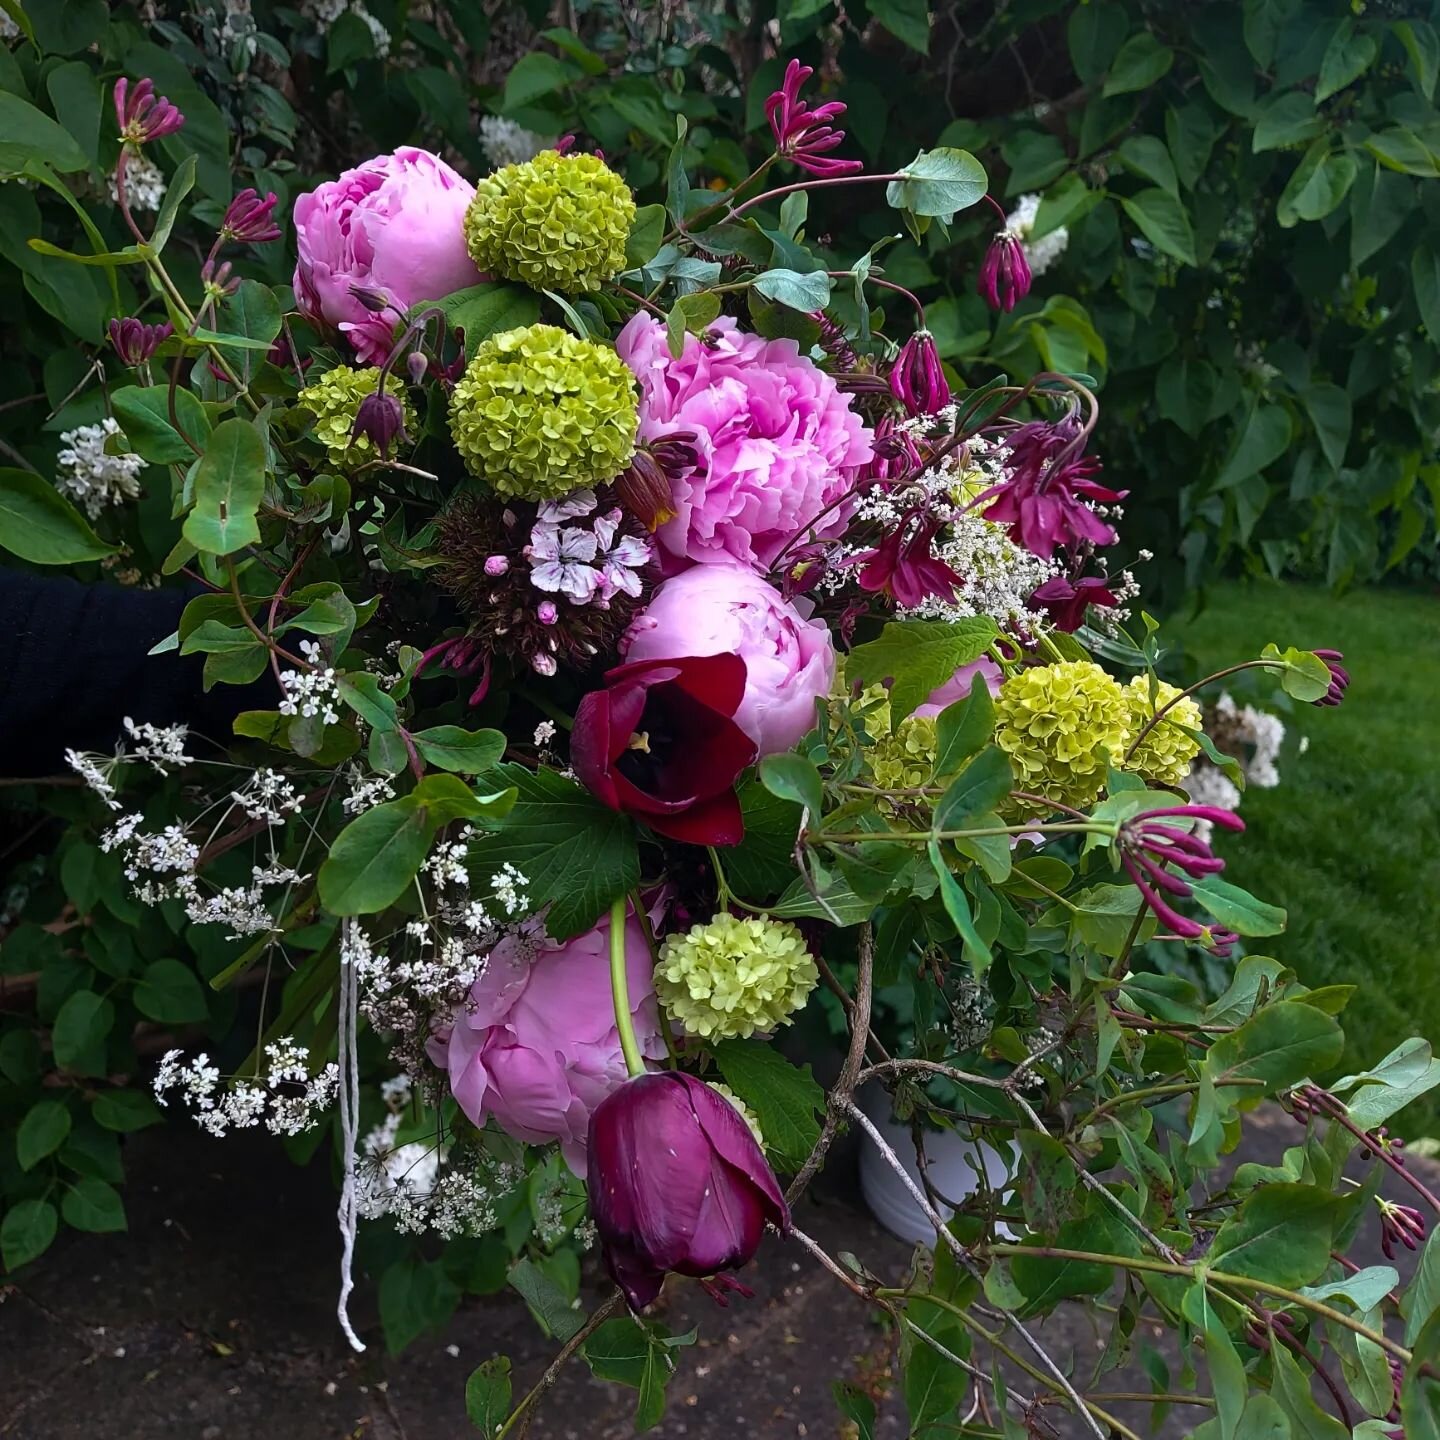 Made this bouquet after visiting @simplybyarrangement using peonies, Verbena and jasmine. Smells absolutely beautiful! Thinking about finding the light for the photo! #heatherandmoss #heatherandmossflowers #flowerjoy #flowertherapy #peonybouquet #peo